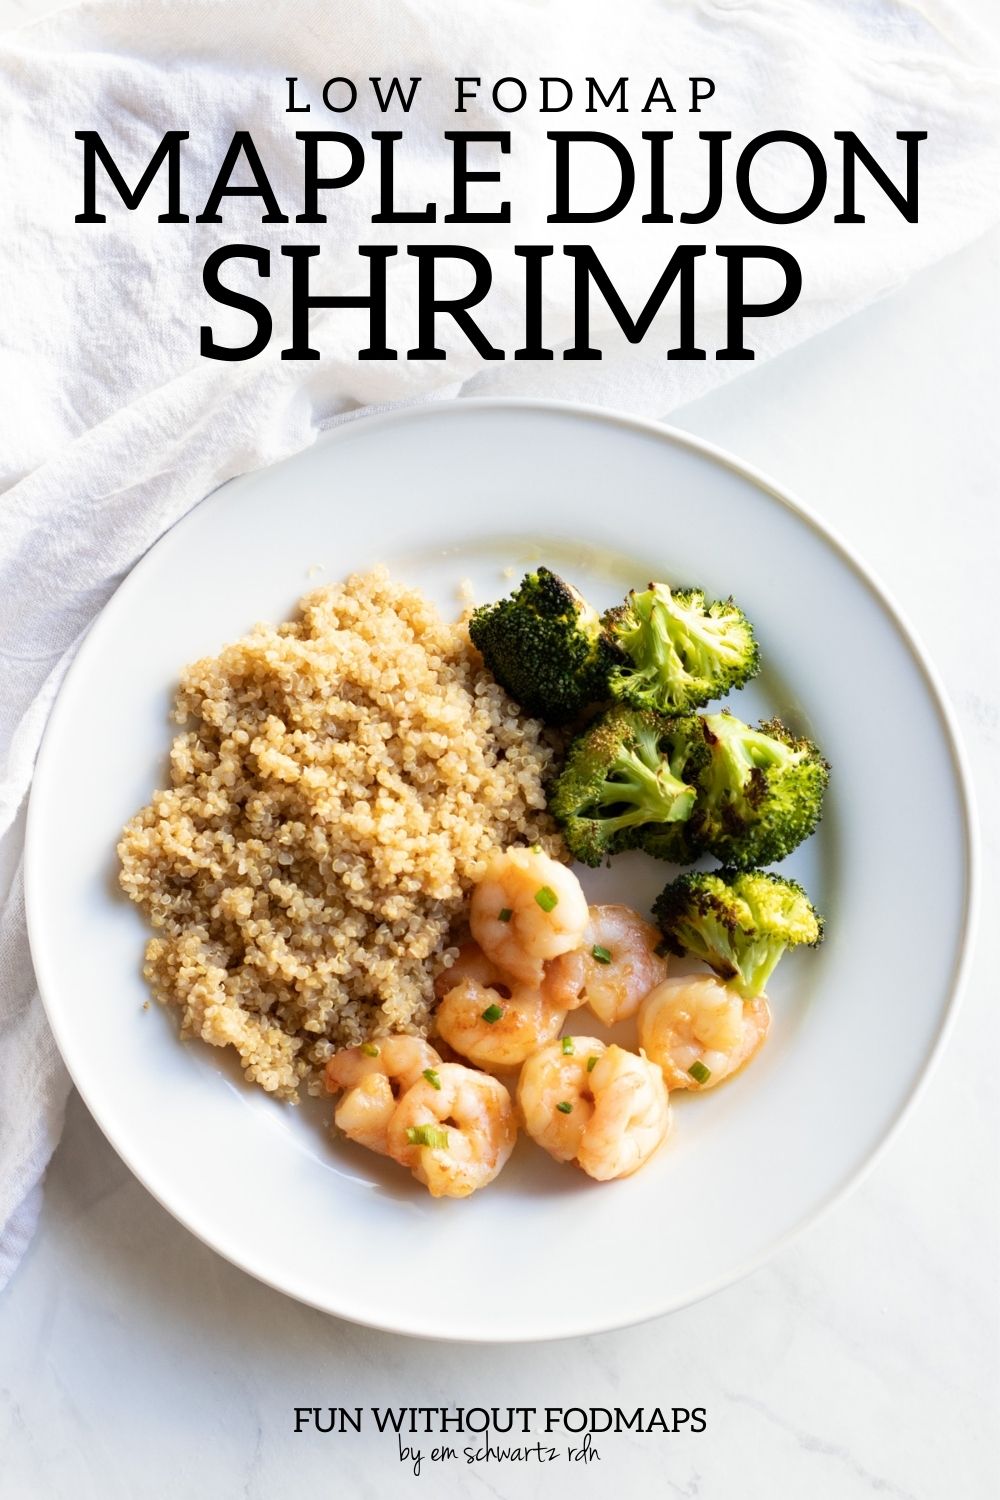 A plate with maple-dijon shrimp, cooked quinoa, and roasted broccoli. In the white space above the plate, text reads "Low FODMAP Maple-Dijon Shrimp."